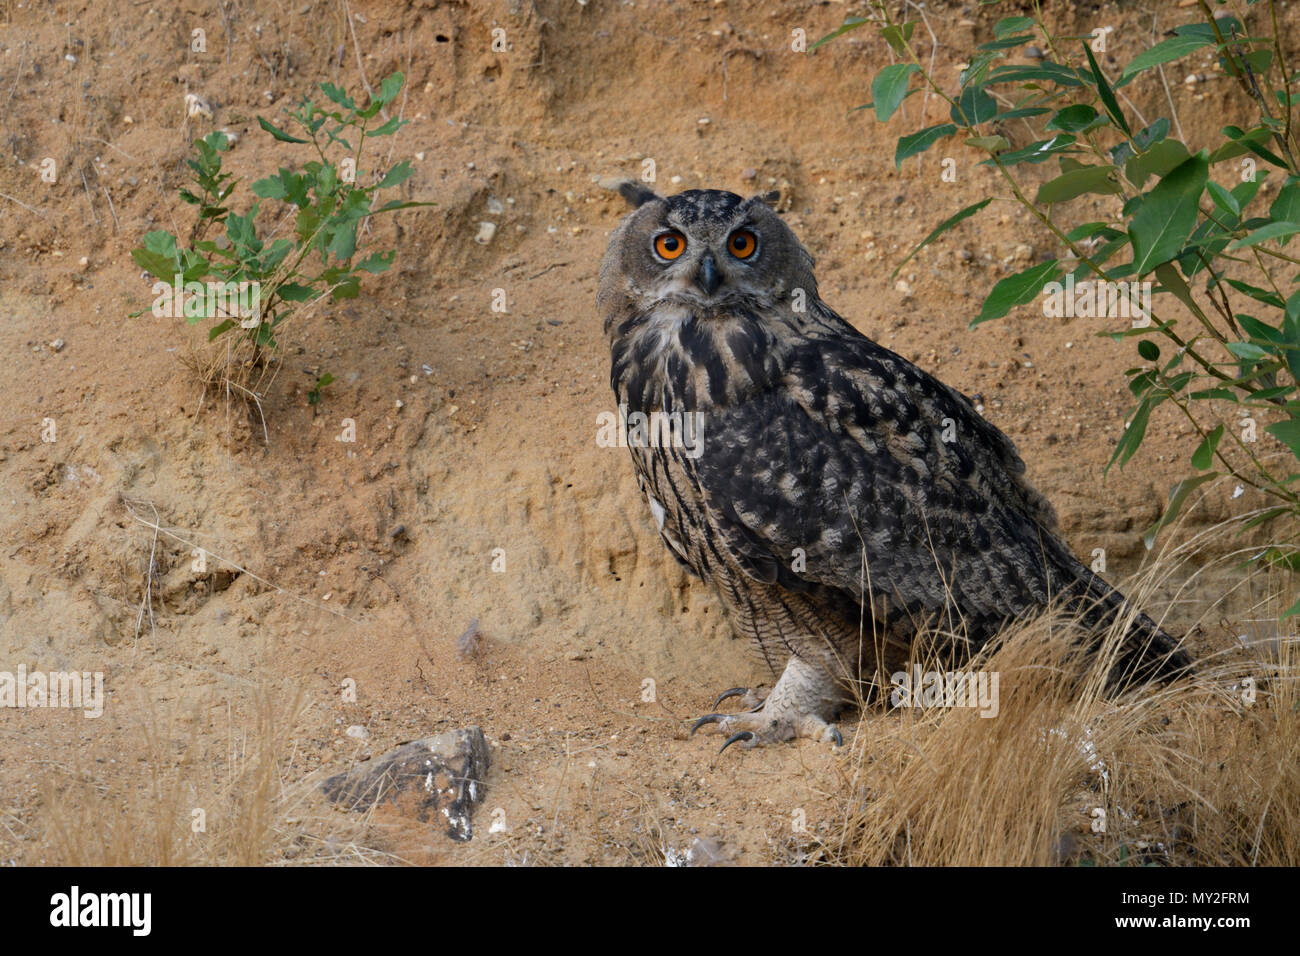 Eurasian Eagle Owl / Uhu ( Bubo bubo ), sitting, resting under a bush in the slope of a sand pit, looks directly towards the photographer, wildlife, E Stock Photo